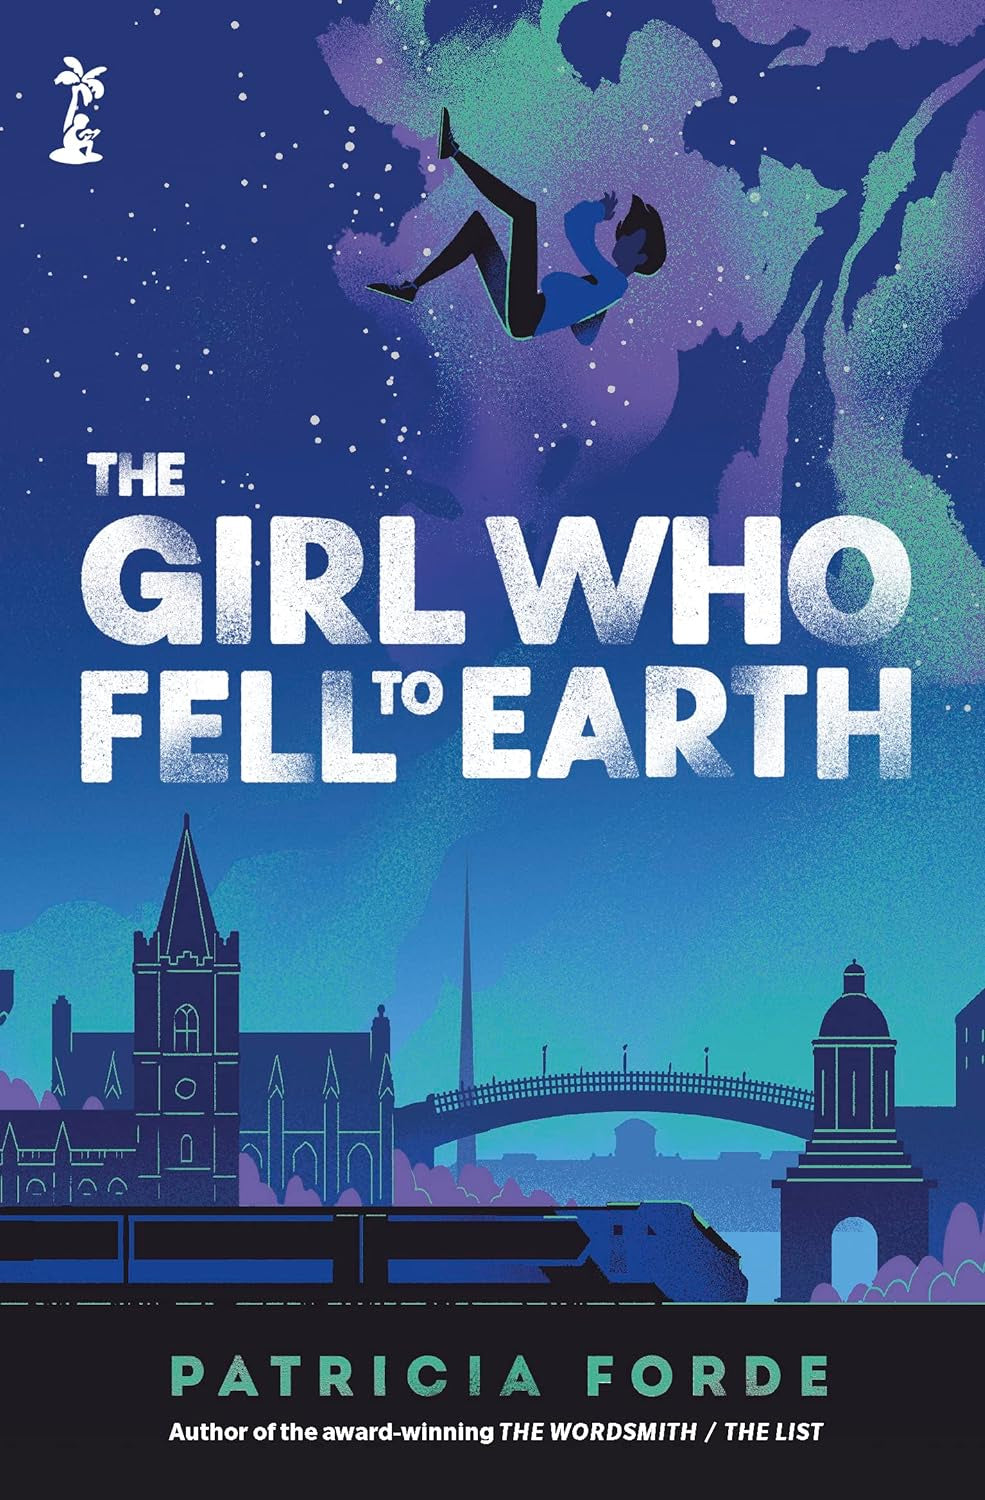 The Girl who Fell to Earth by Patricia Forde